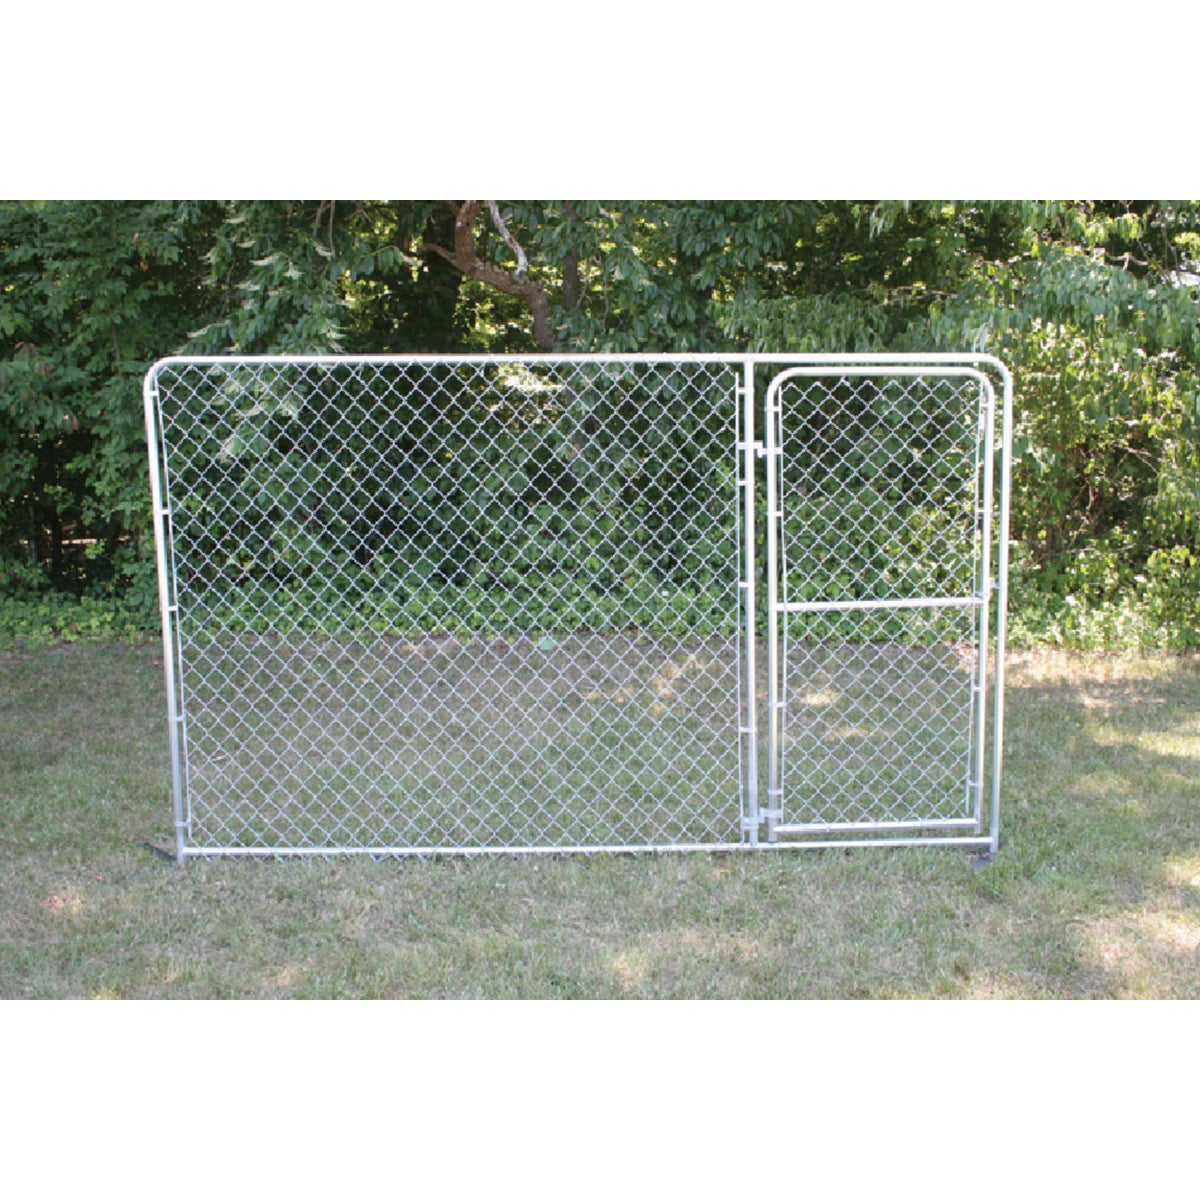 Item 810053, Silver Series pet kennel expansion panel with door.